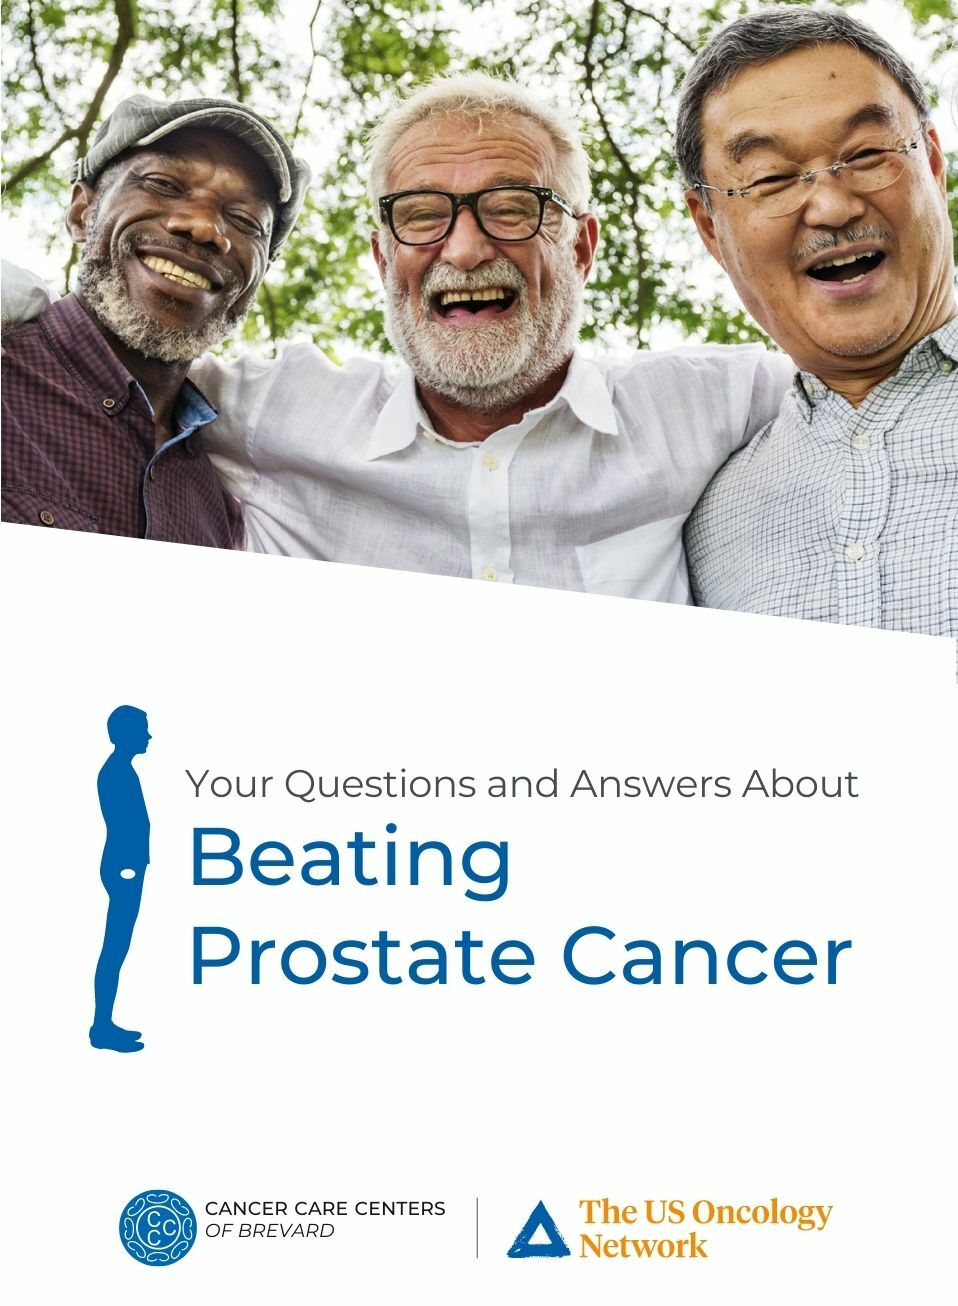 cancer care centers of brevard - prostate cancer questions and answers